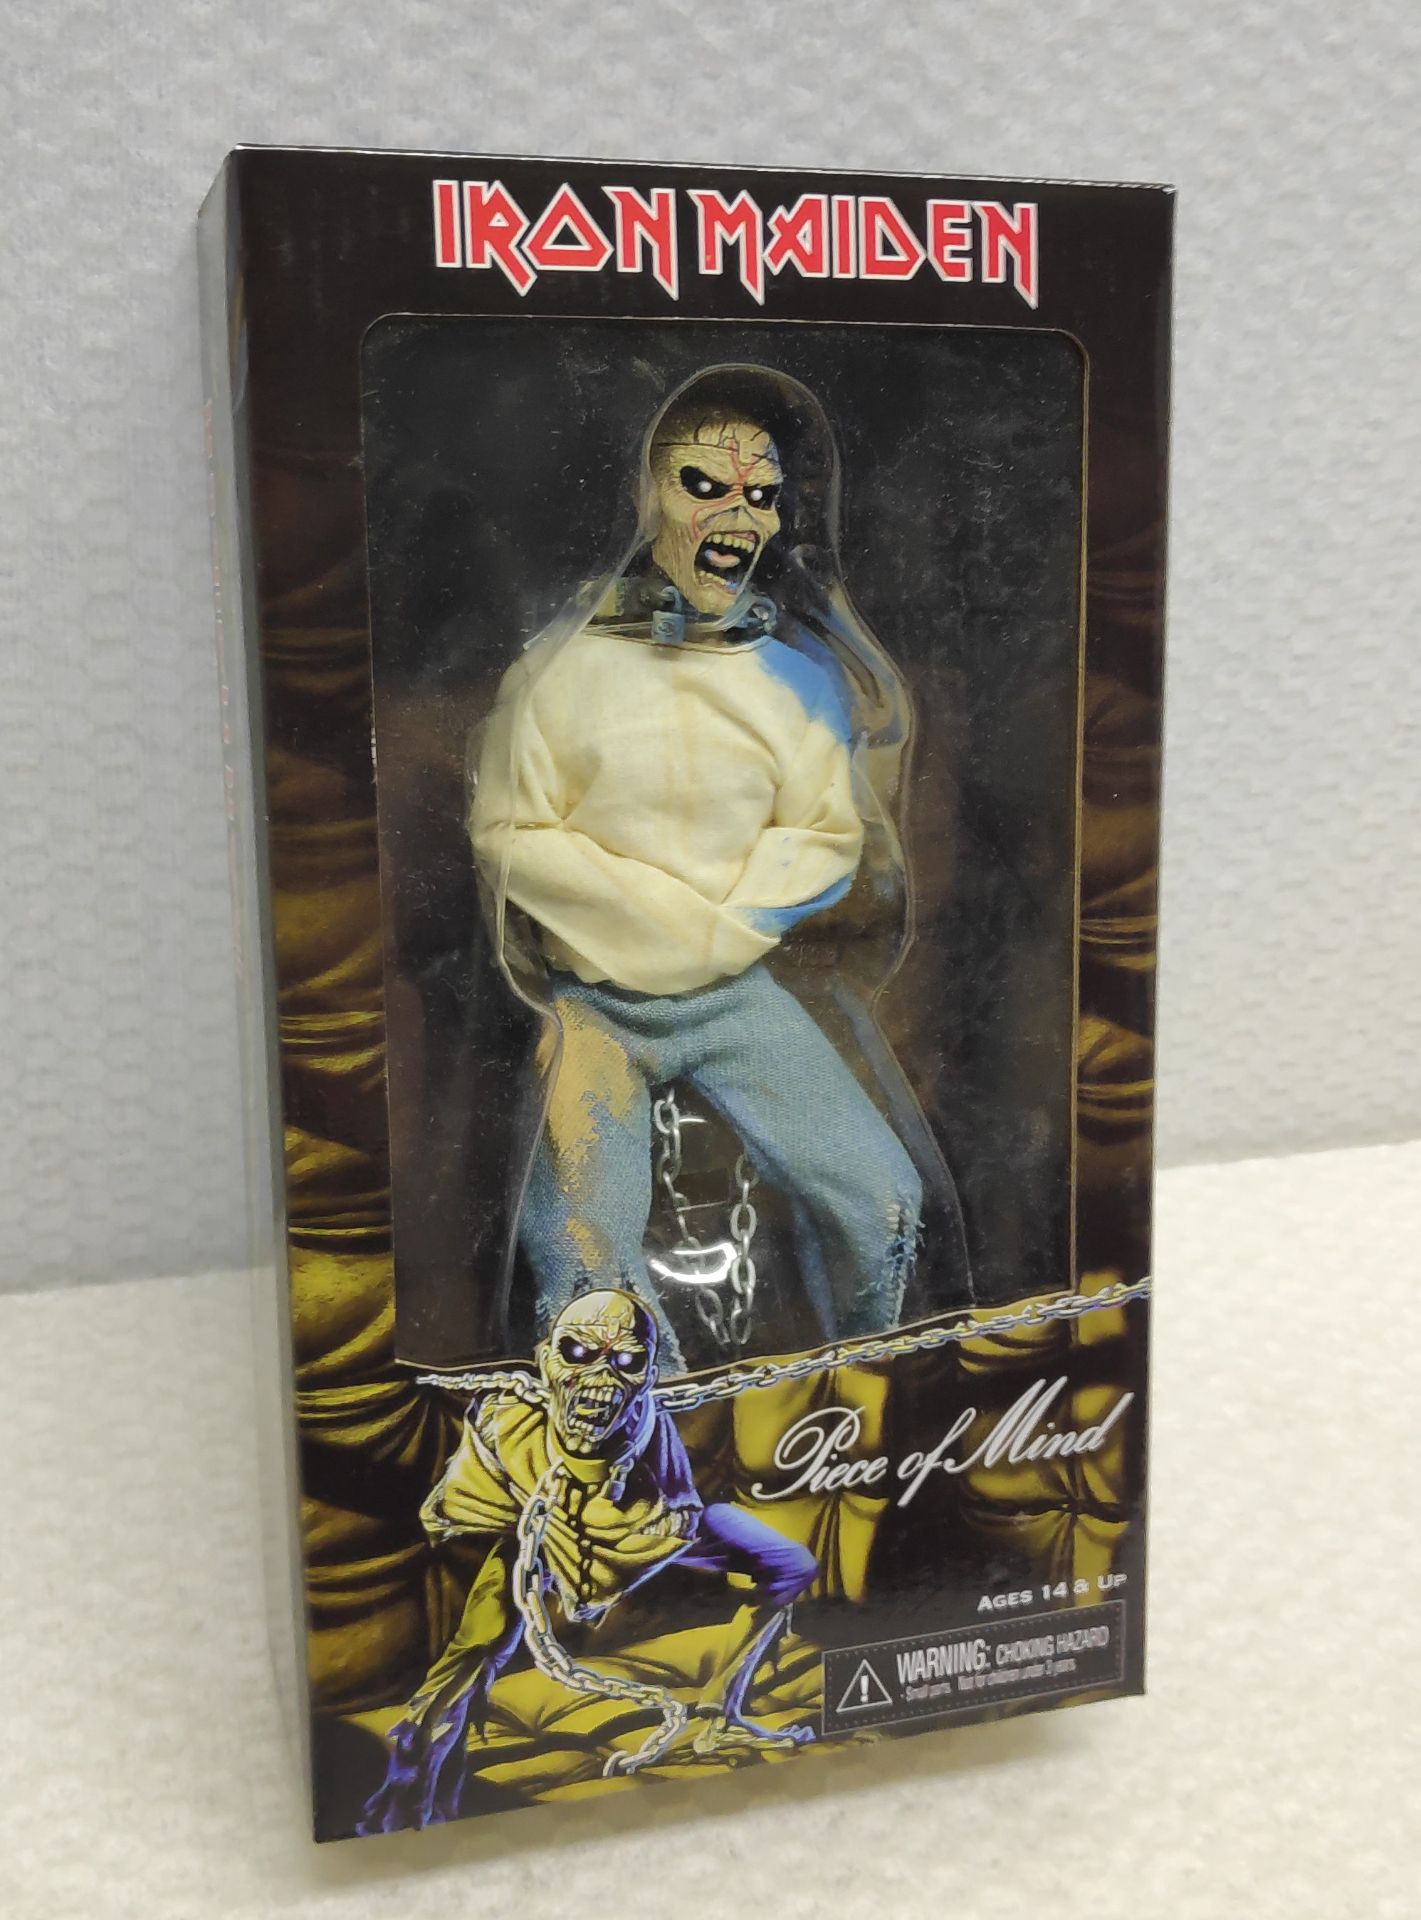 1 x Iron Maiden Eddie Piece of Mind NECA Action Figure - New/Boxed - HTYS166 - CL720 - Location: Alt - Image 11 of 11